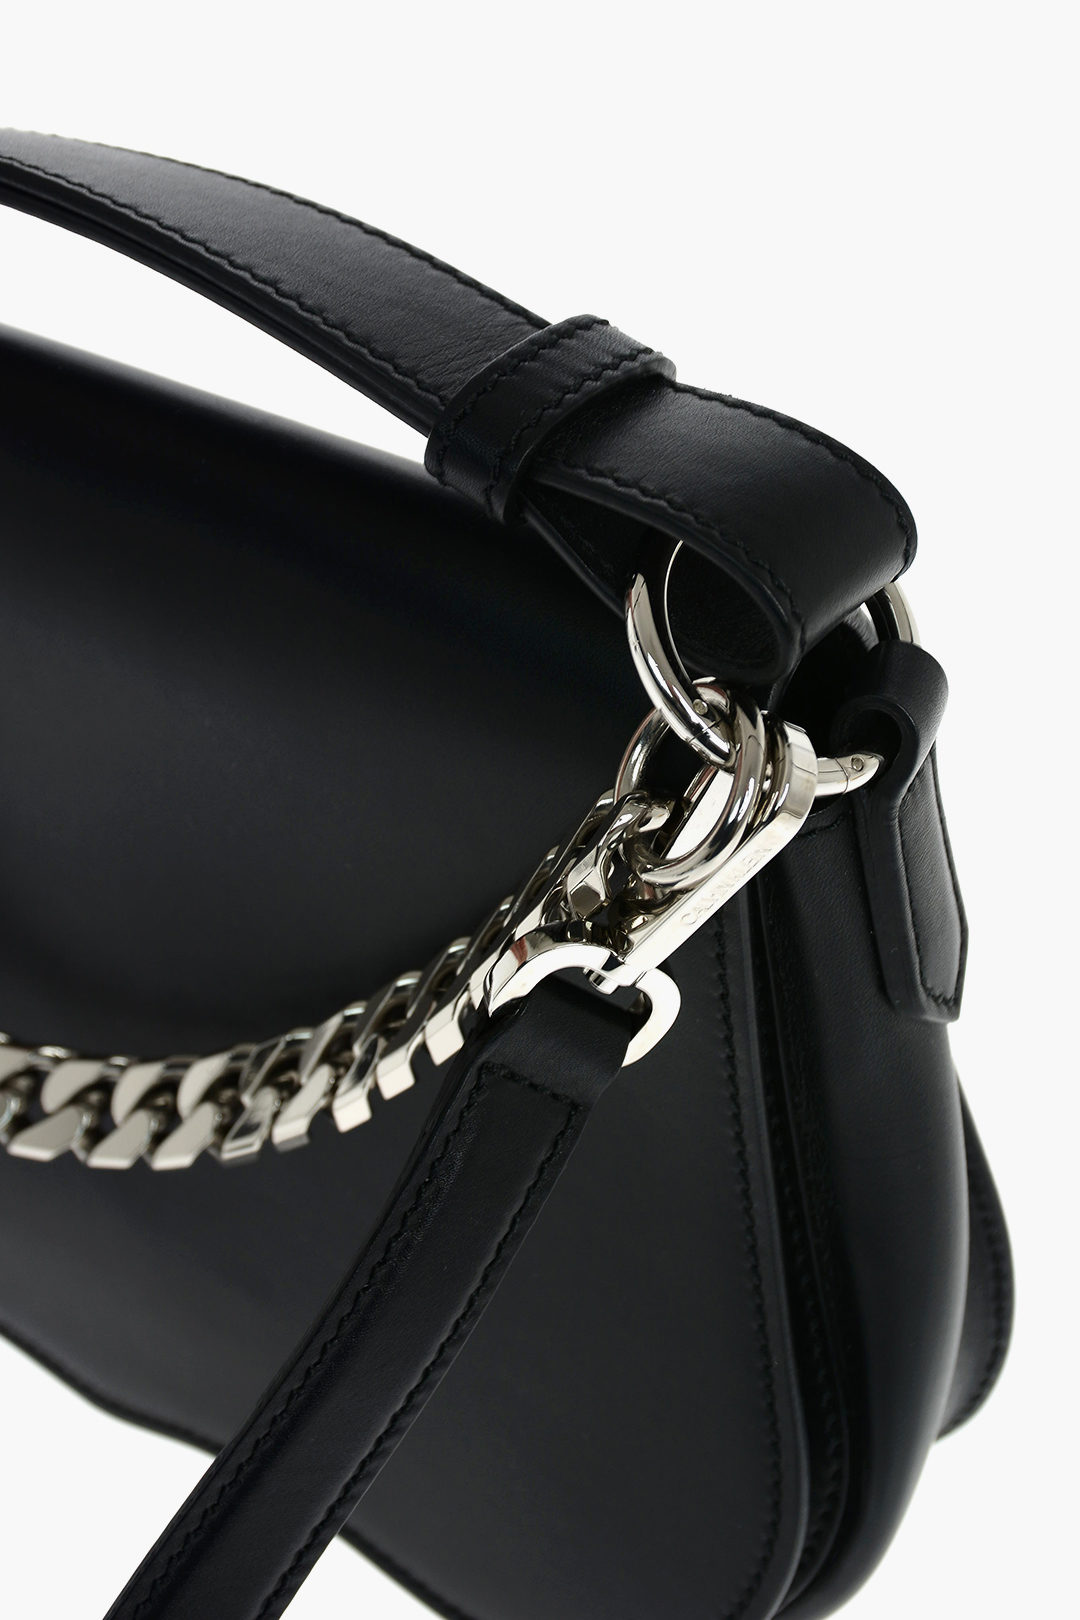 Calvin Klein 205W39NYC Leather Chain Shoulder Bag women - Glamood Outlet